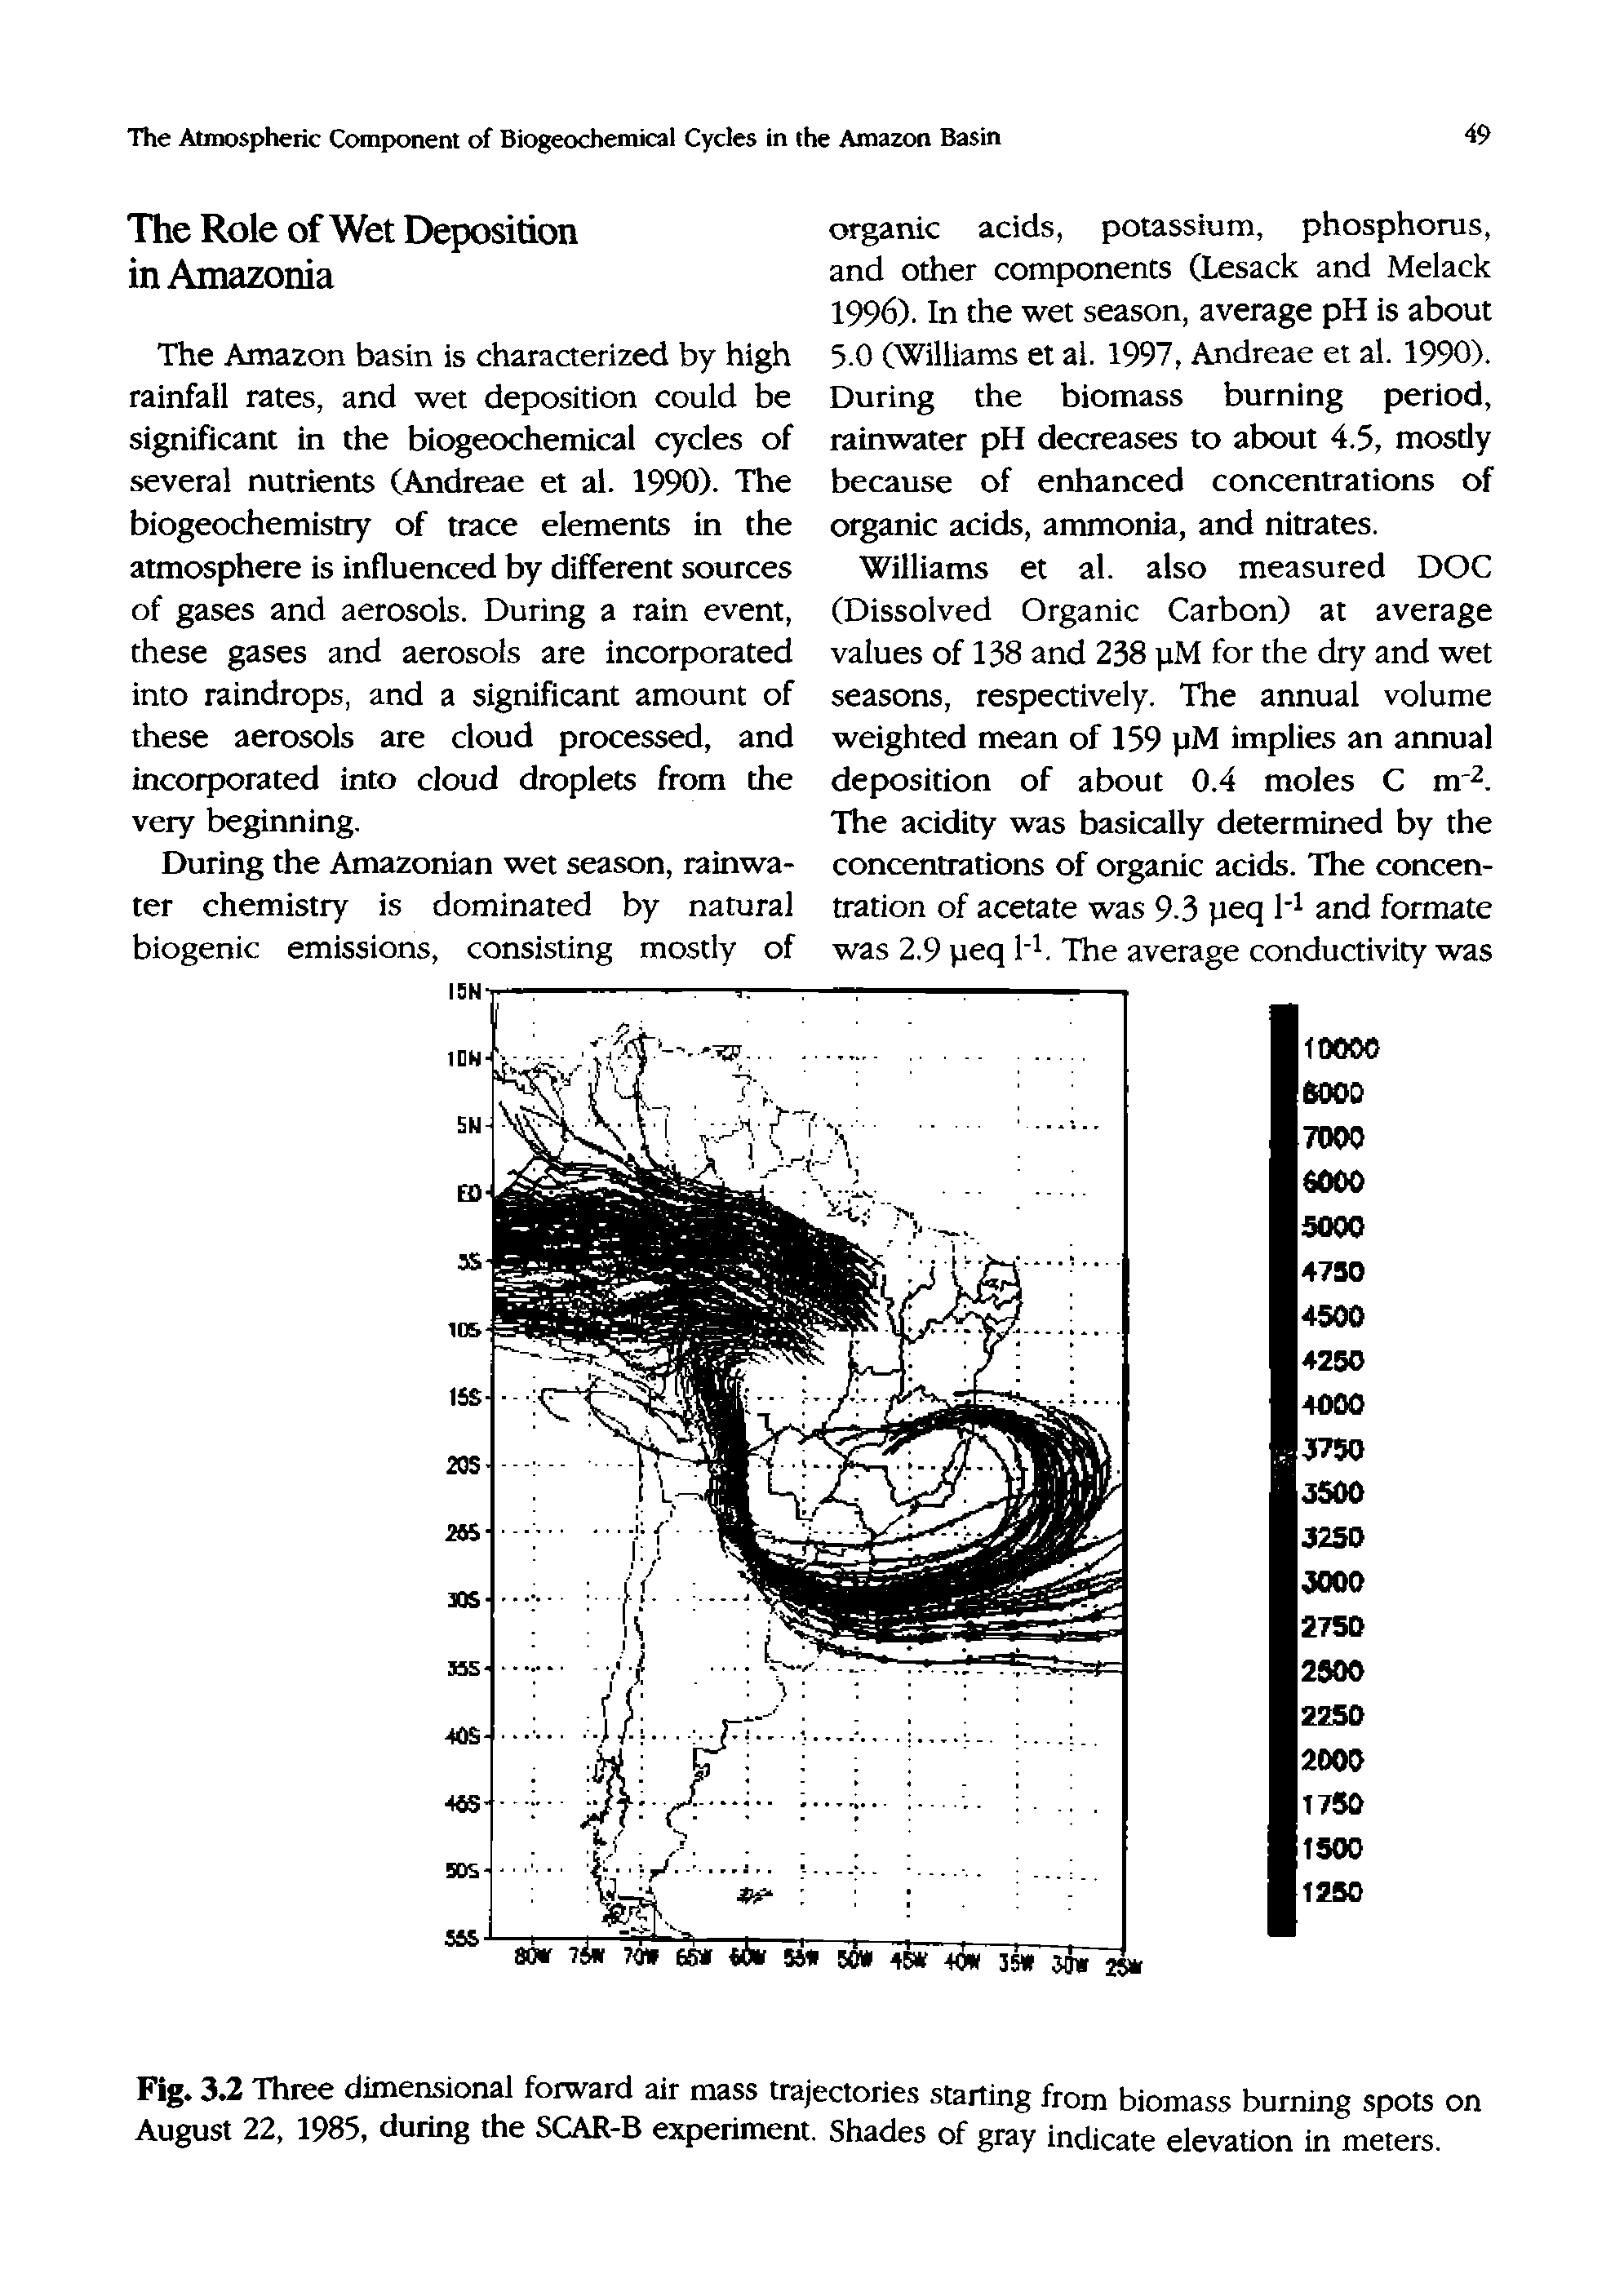 Fig. 3.2 Three dimensional forward air mass trajectories starting from biomass burning spots on August 22, 1985, during the SCAR-B experiment. Shades of gray indicate elevation in meters.